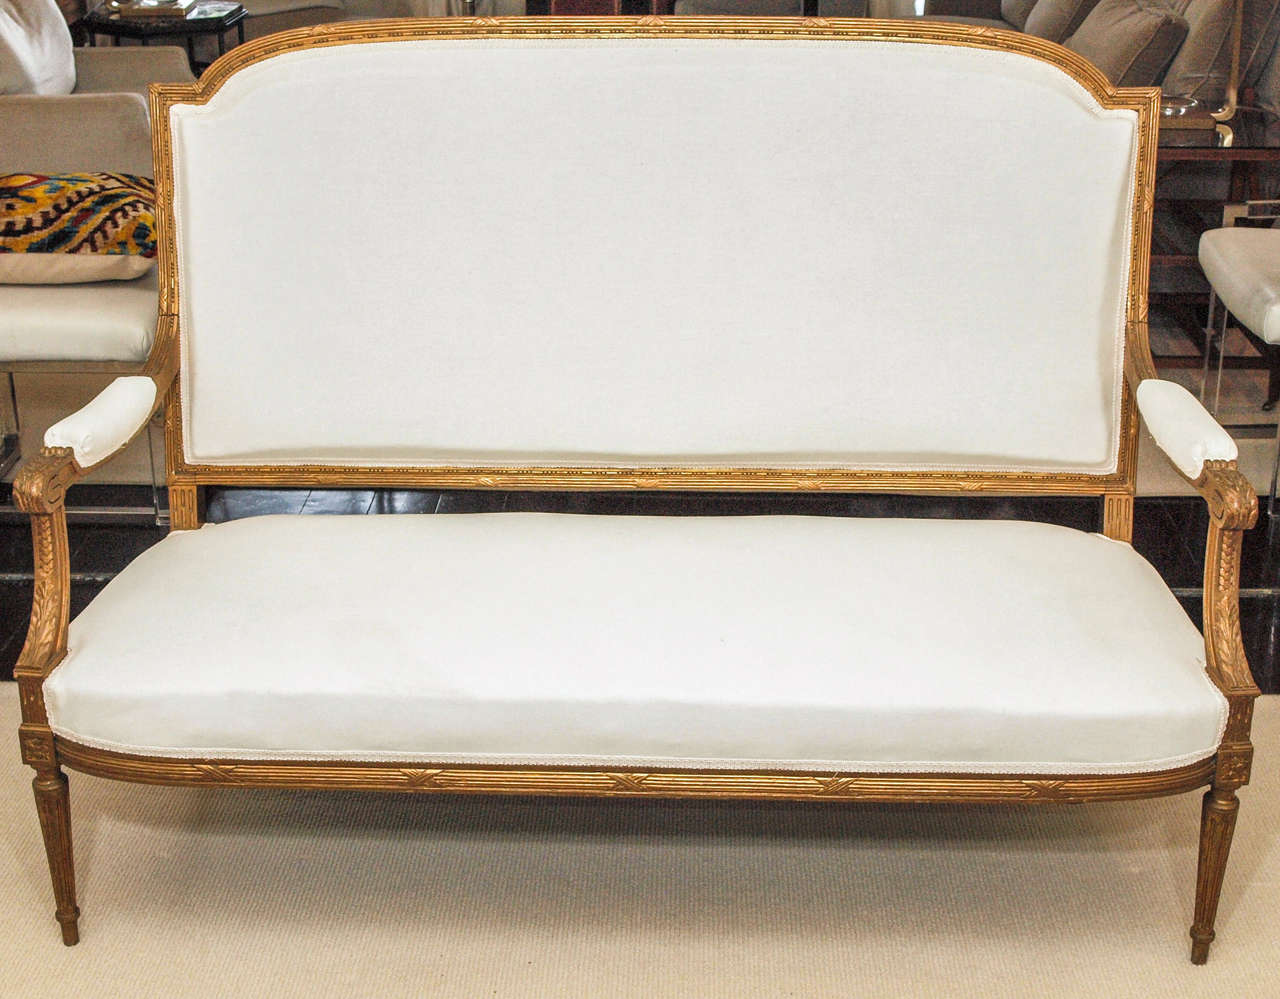 Lovely high-back settee in the Louis XVI taste; gilt beechwood with padded arms, out-curving seat and attenuated tapering reeded legs; subtly carved throughout with losses to the gilt appropriate to age and use; now upholstered in white muslin